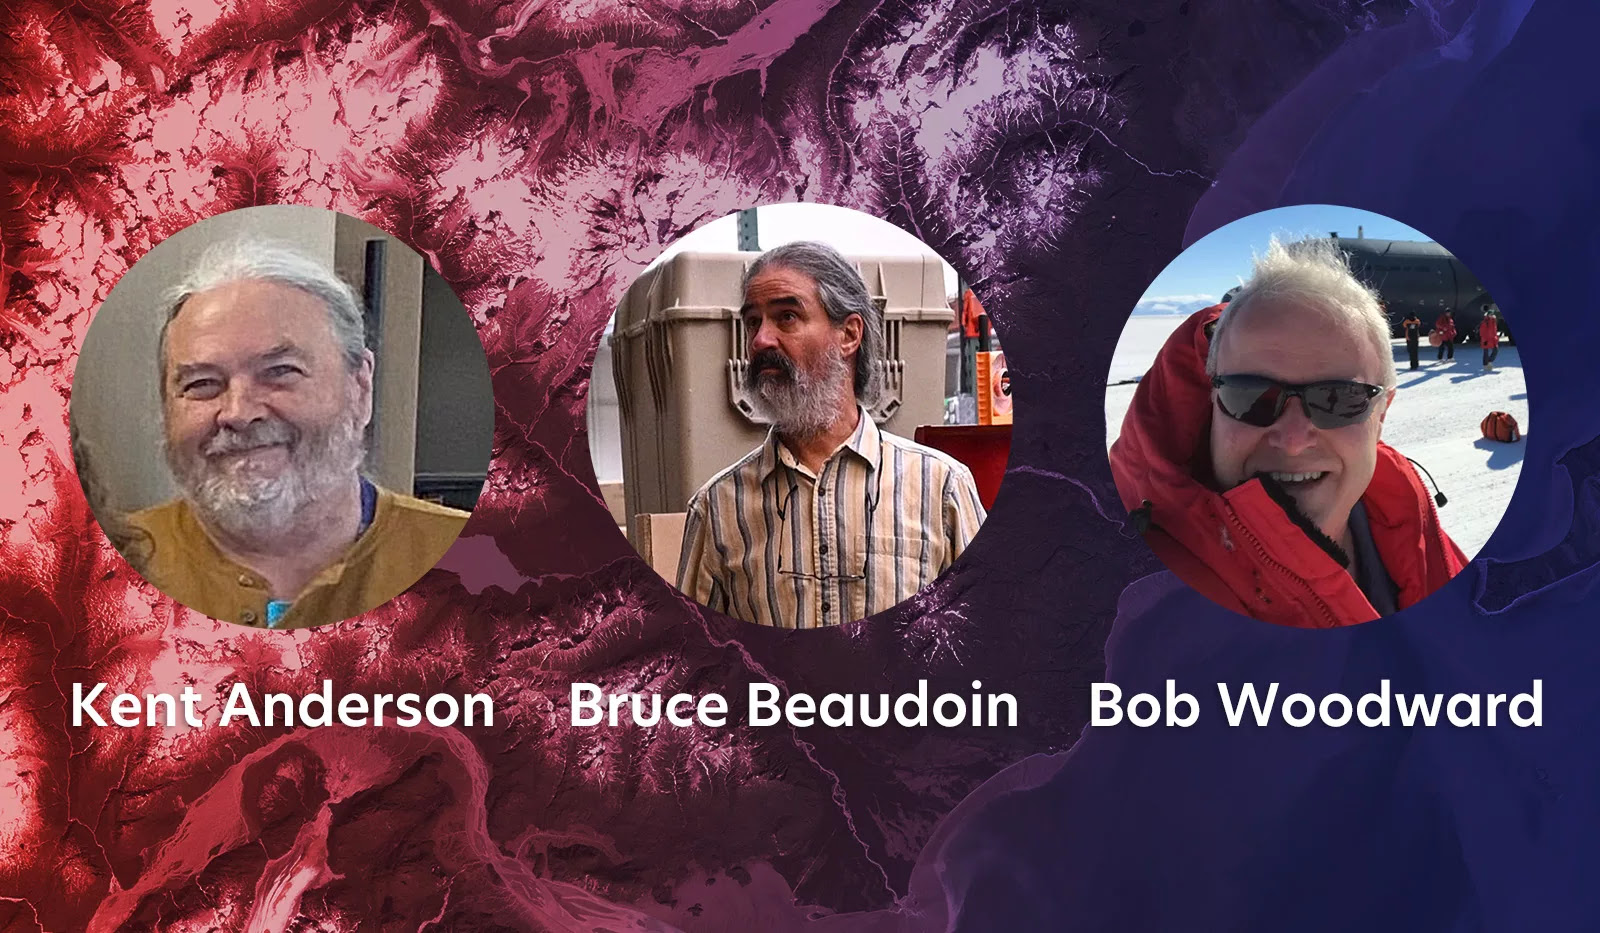 three headshot photos on a decorative background labeled with names: Kent Anderson, Bruce Beaudoin, and Bob Woodward